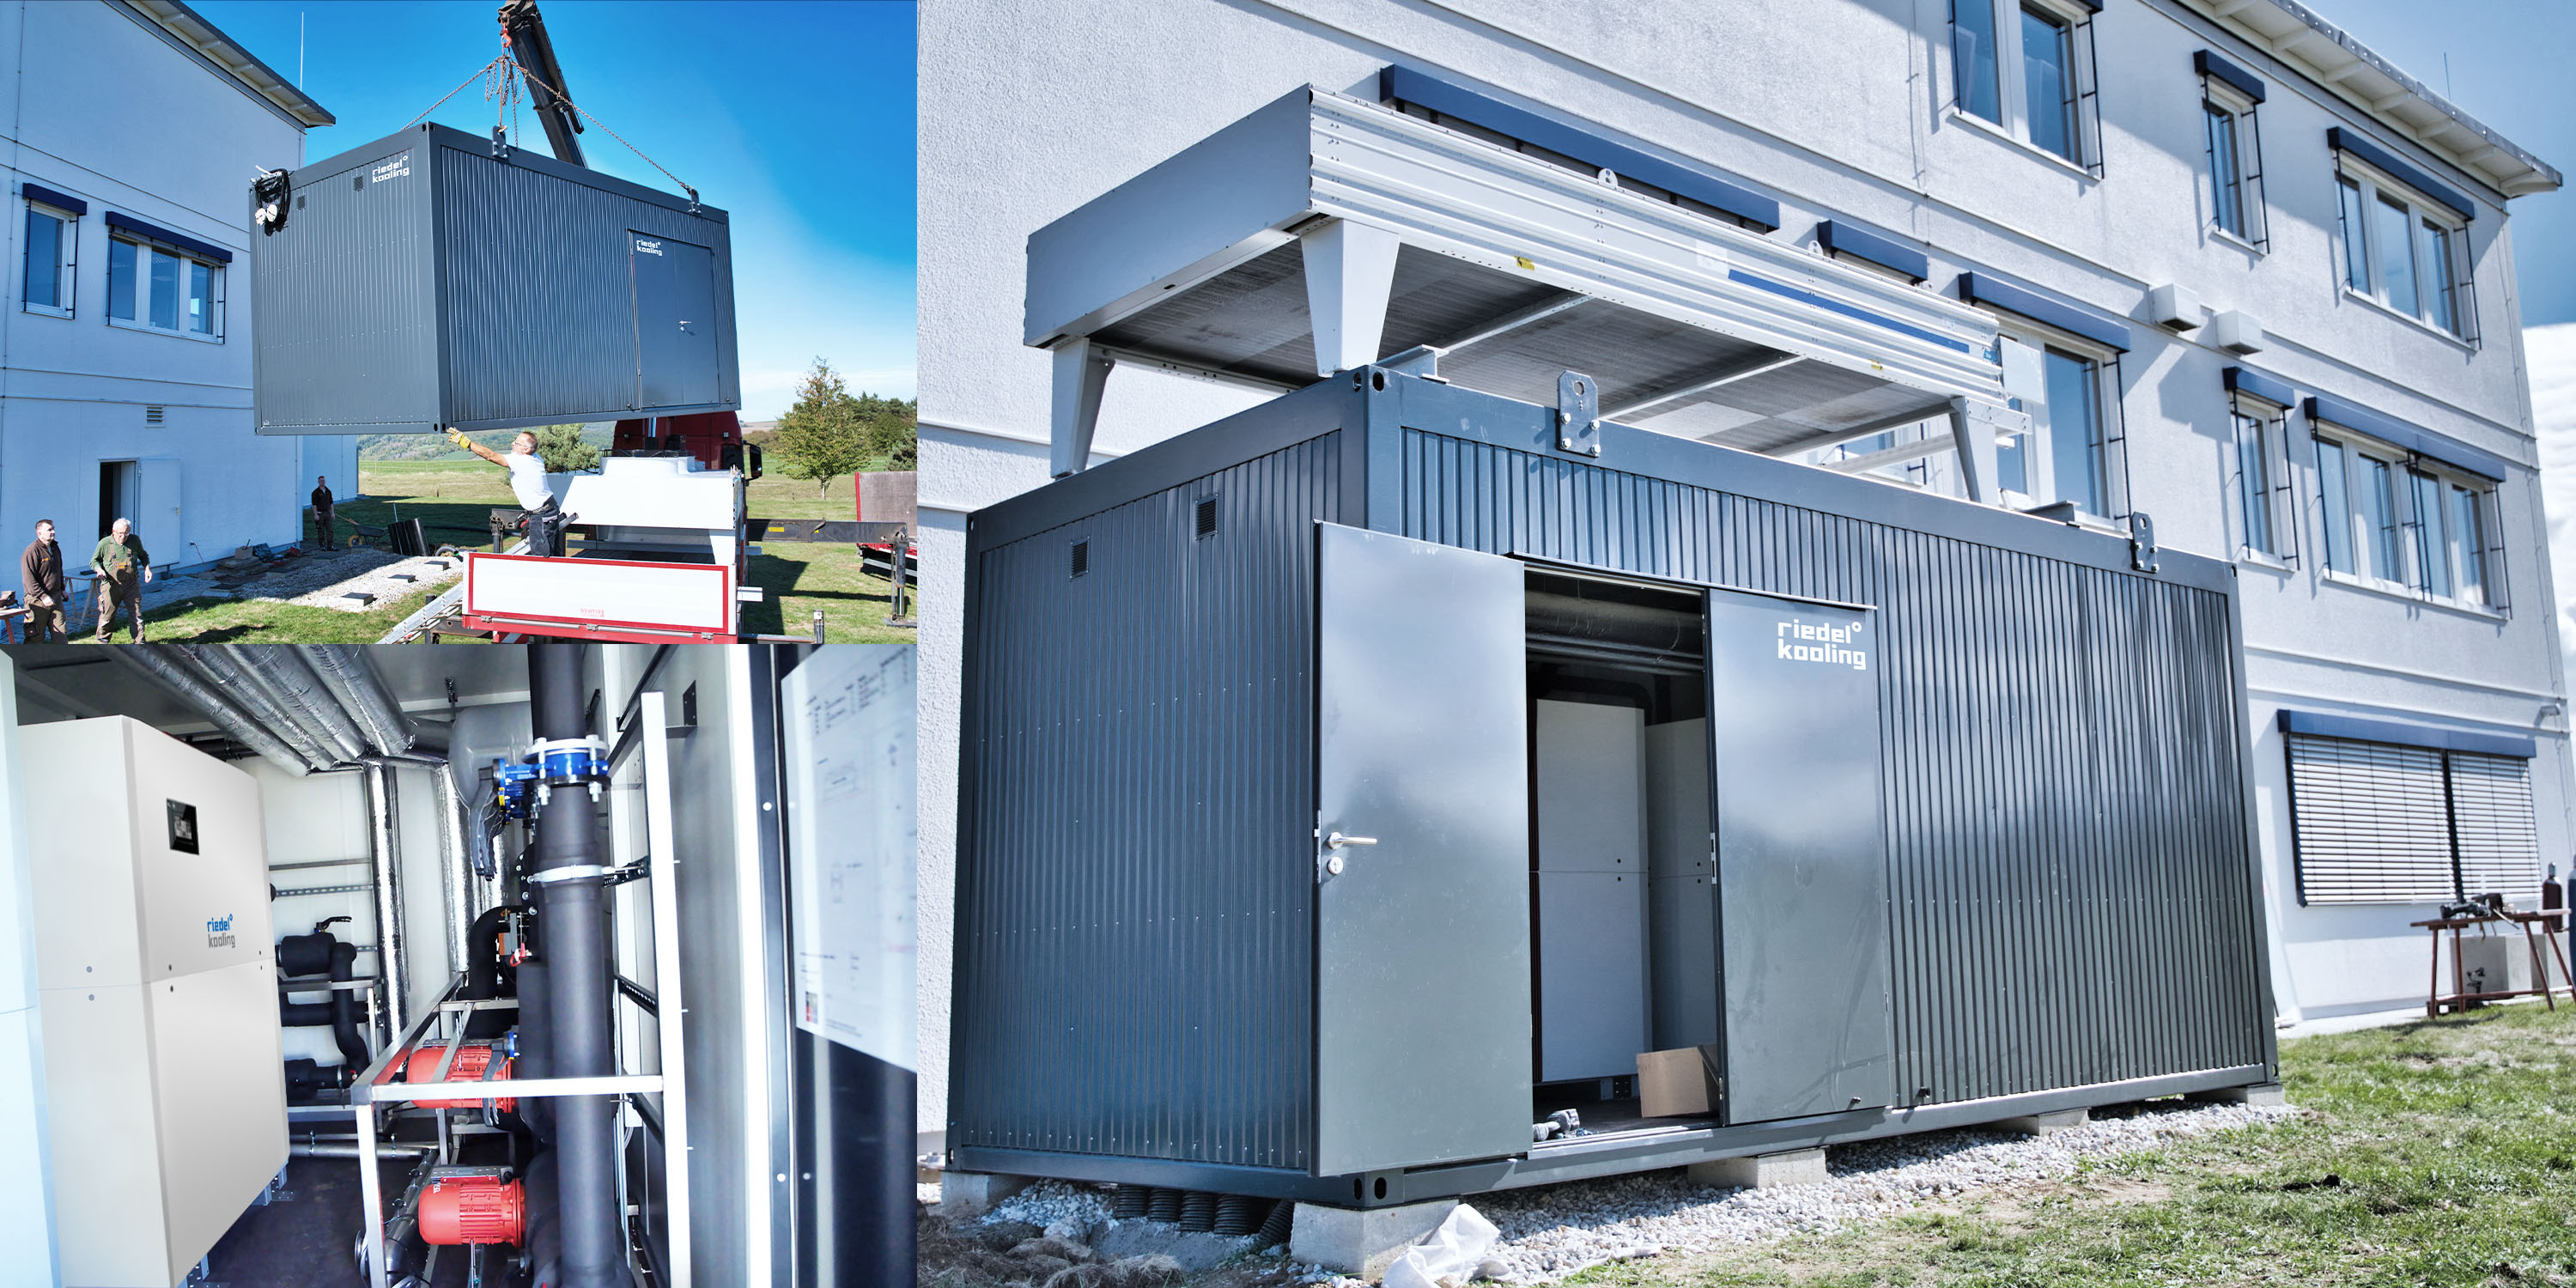 Riedel Kooling, heating and cooling systems in containers, plug-and-play solution